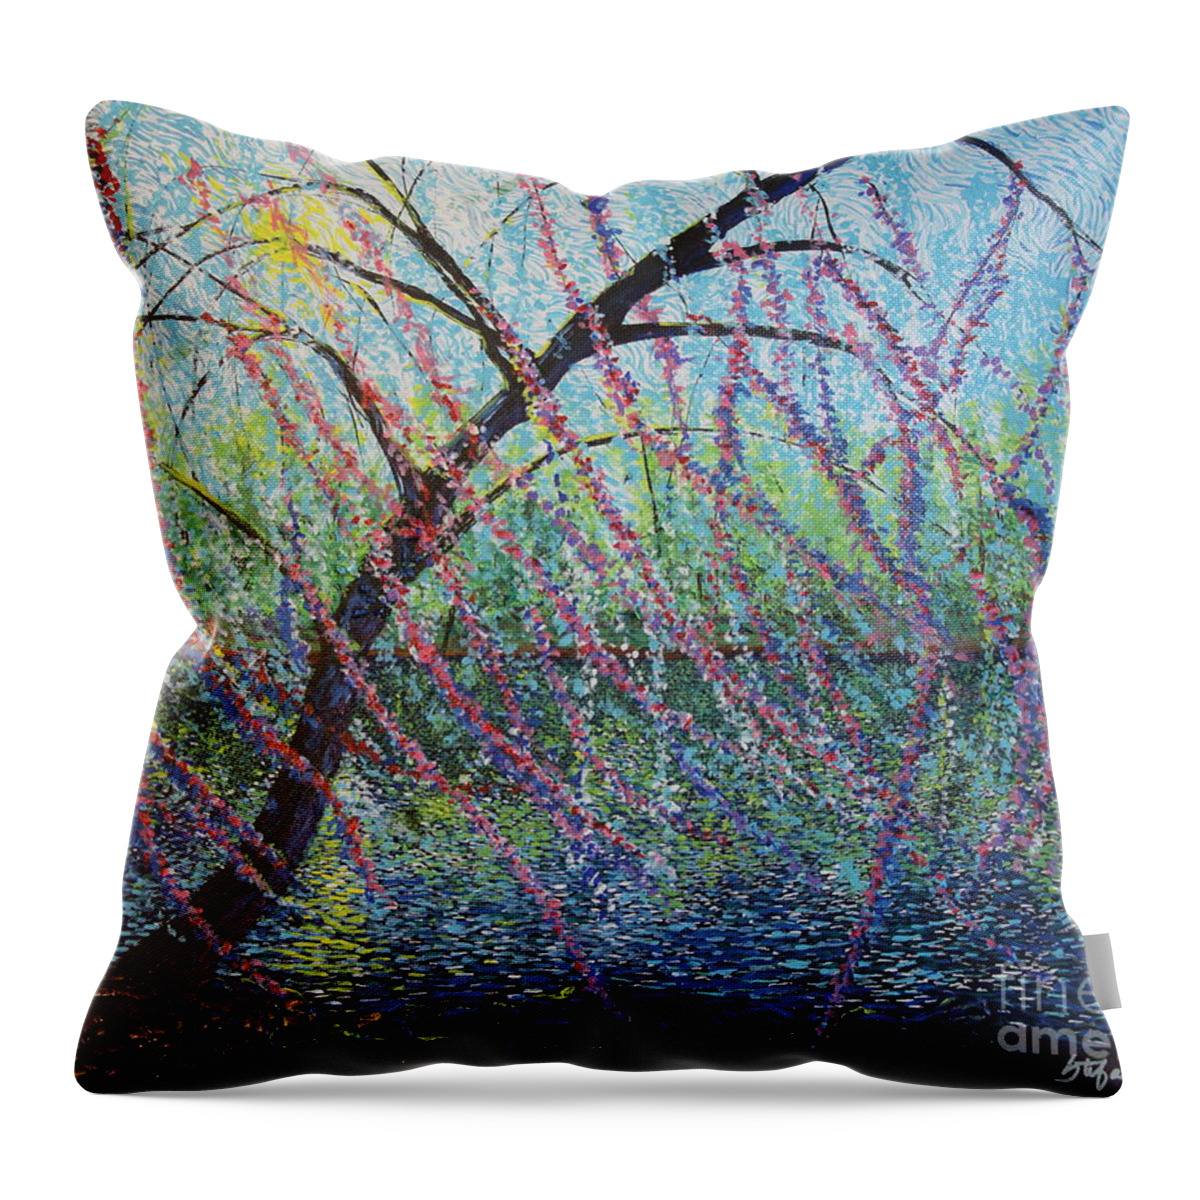 Squiggles Throw Pillow featuring the painting Weeping Cherry by Stefan Duncan